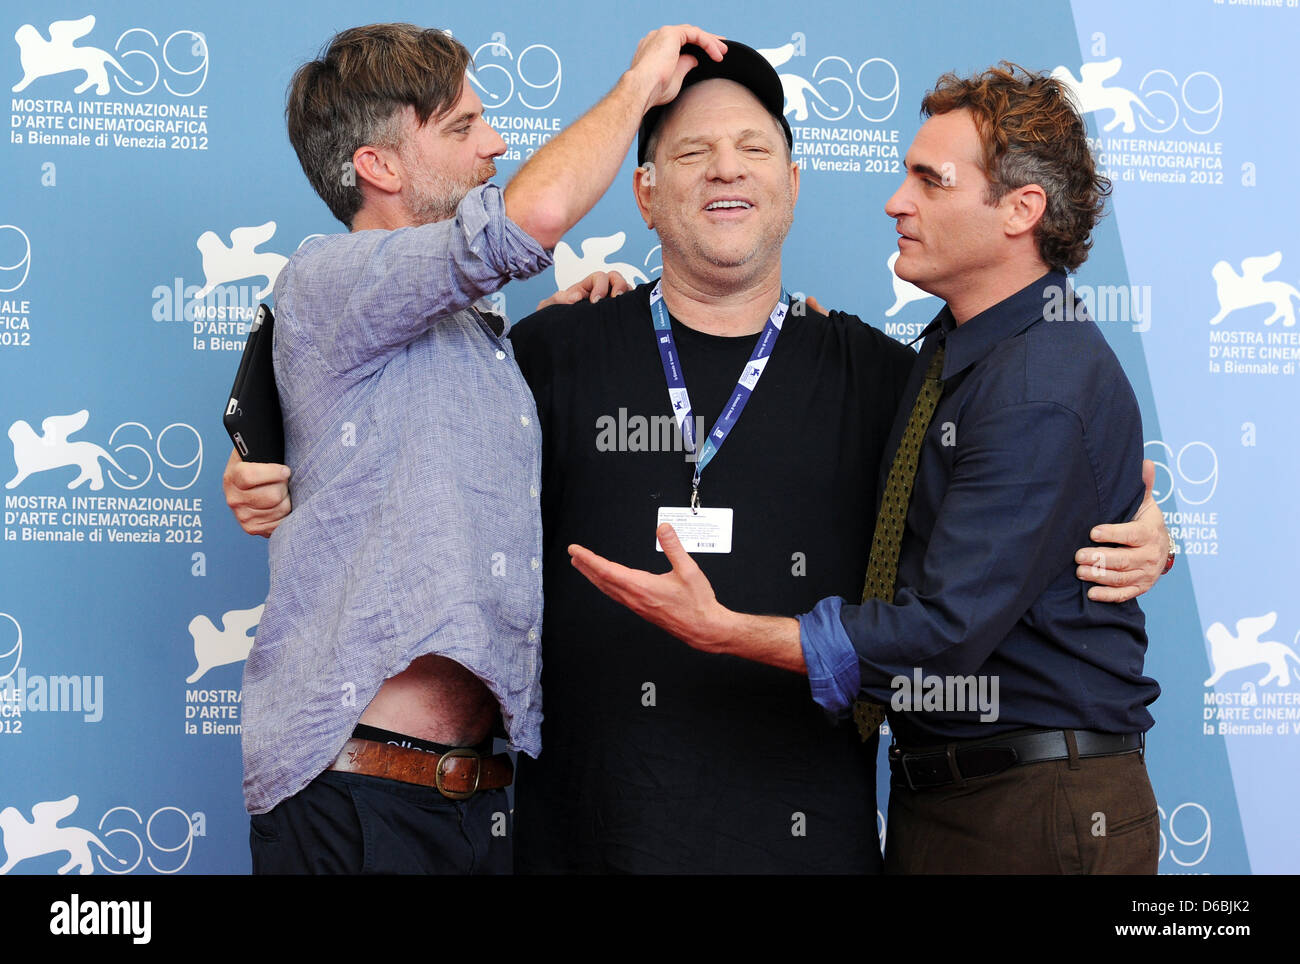 US director Paul Thomas Anderson (L-R), US film producer Harvey Weinstein and US actor Joaquin Phoenix pose during a photocall of the movie 'The Master' during the 69th Venice International Film Festival in Venice, Italy, 01 September 2012. The movie is presented in the official competition 'Venezia 69' of the festival, which runs from 29 August to 08 September. Photo: Jens Kalaene Stock Photo